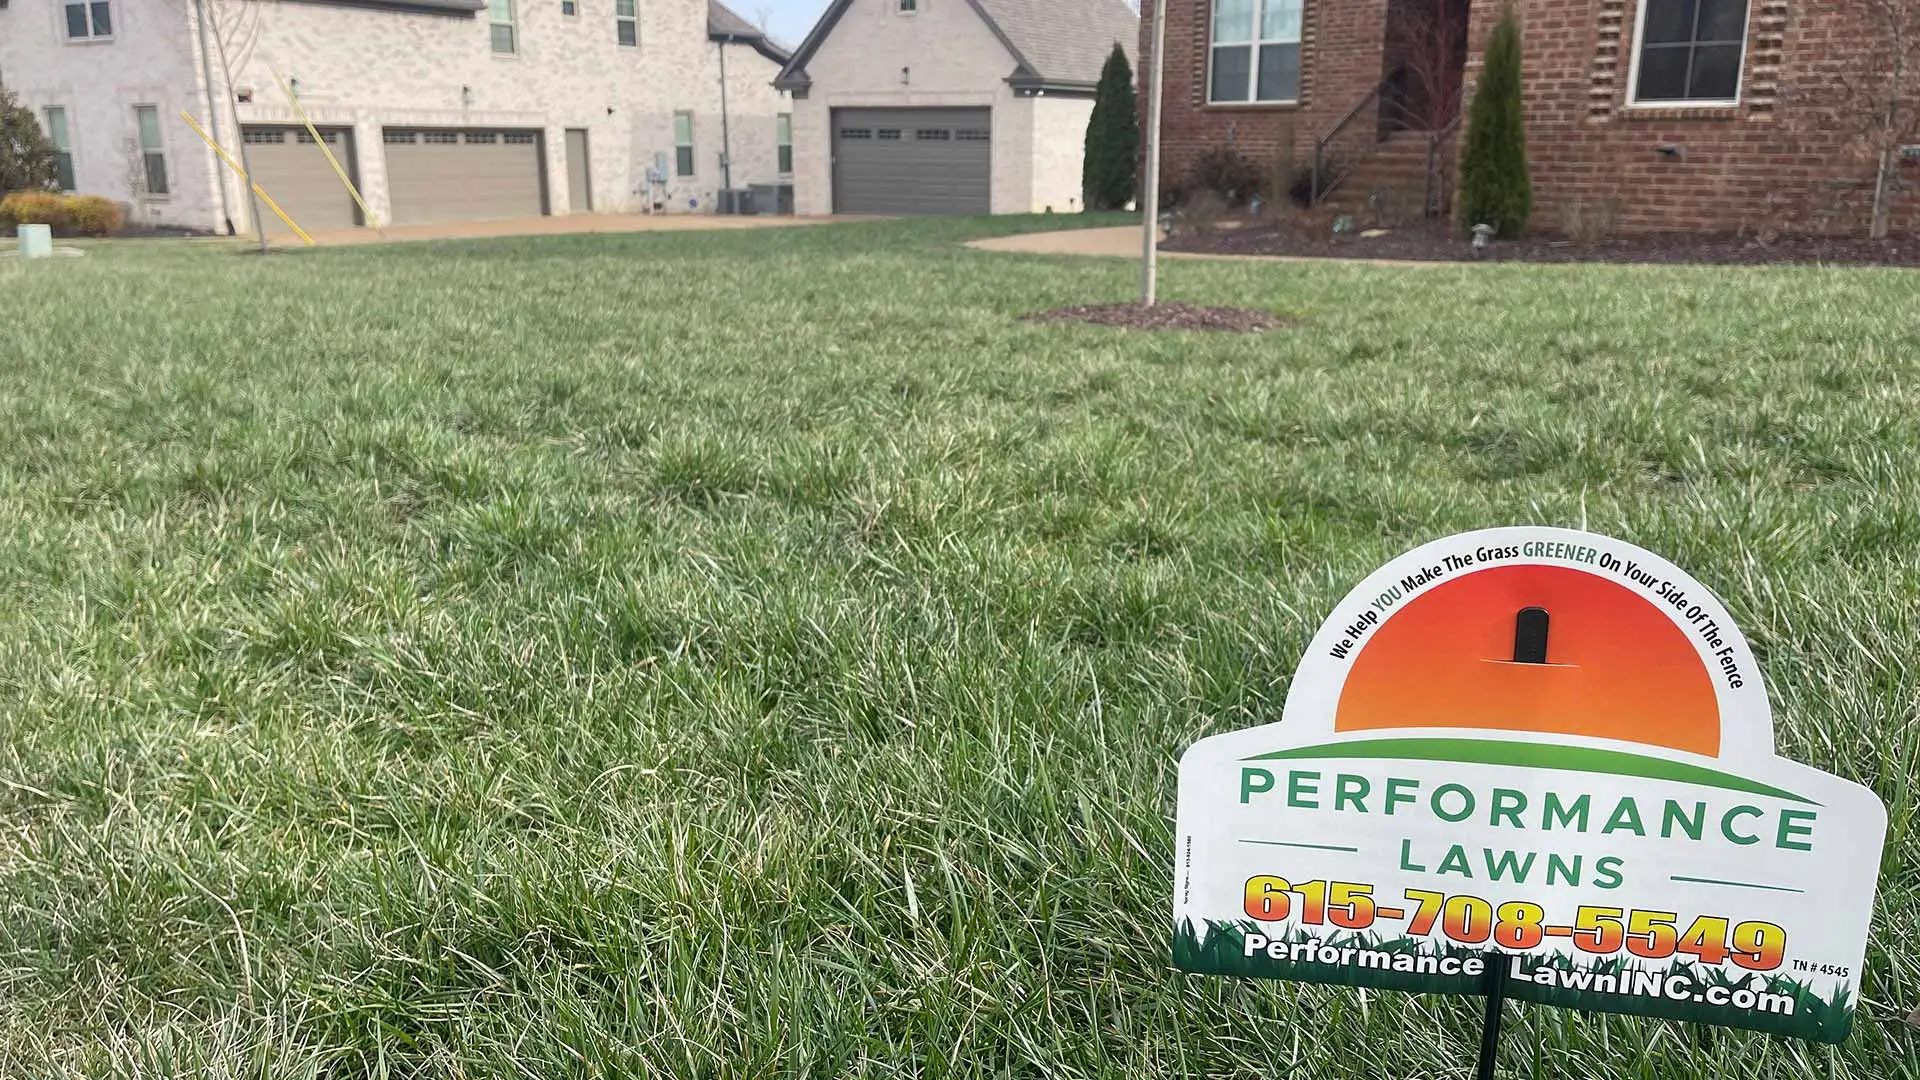 Signage from Performance Lawns Inc. displayed on a lawn in Gallatin, TN.